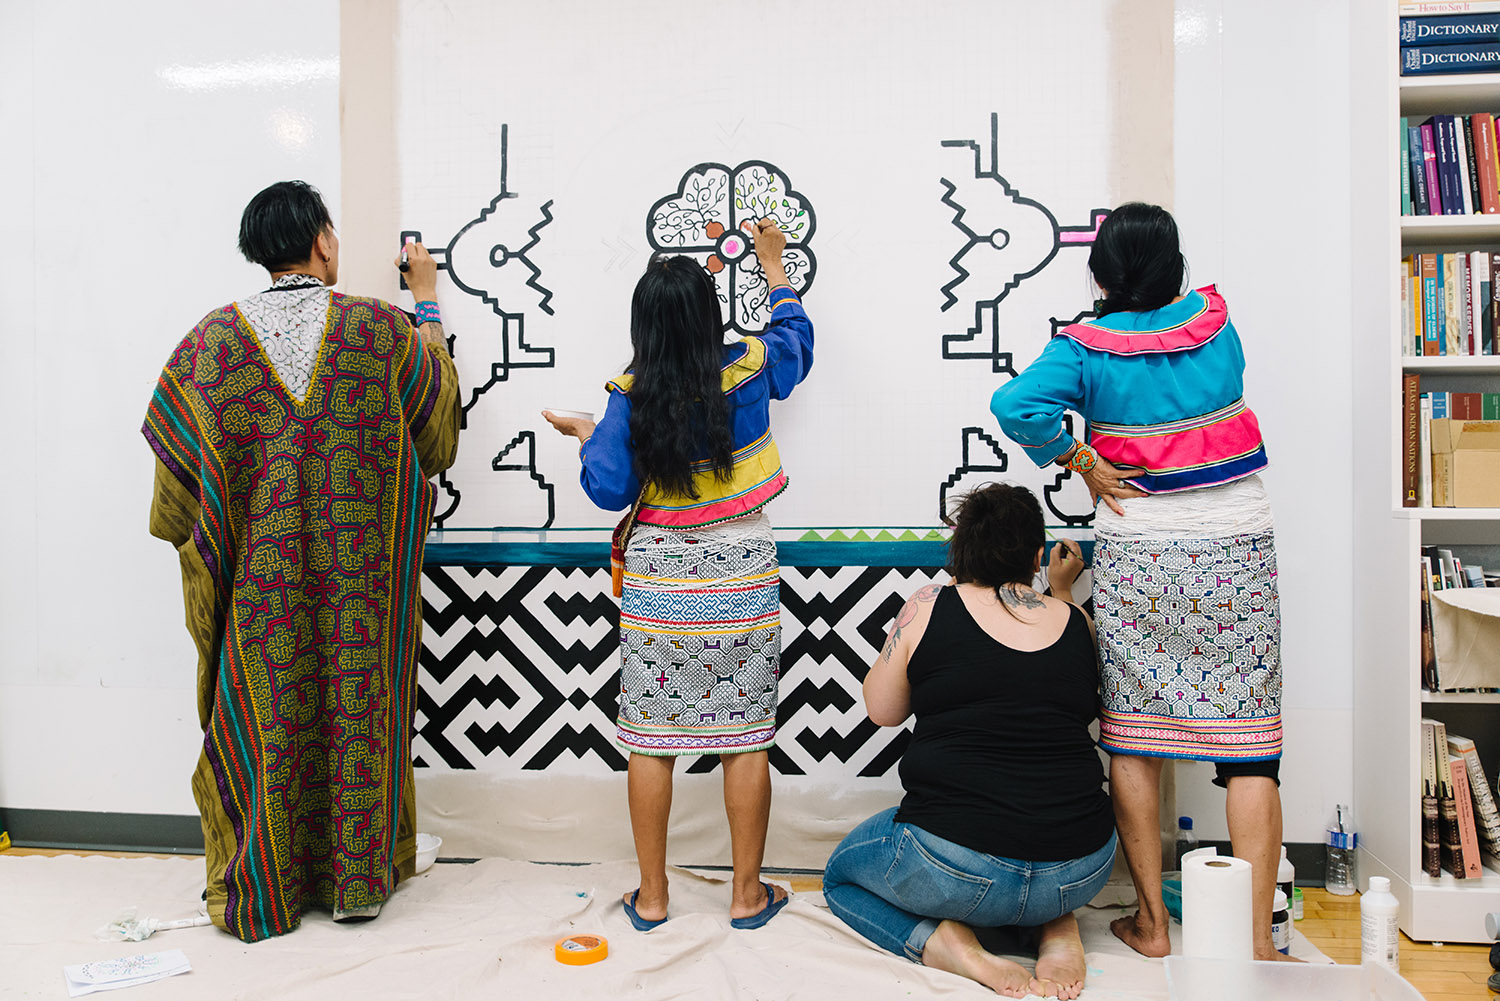 Indigenous artists are shown painting the new art mural.